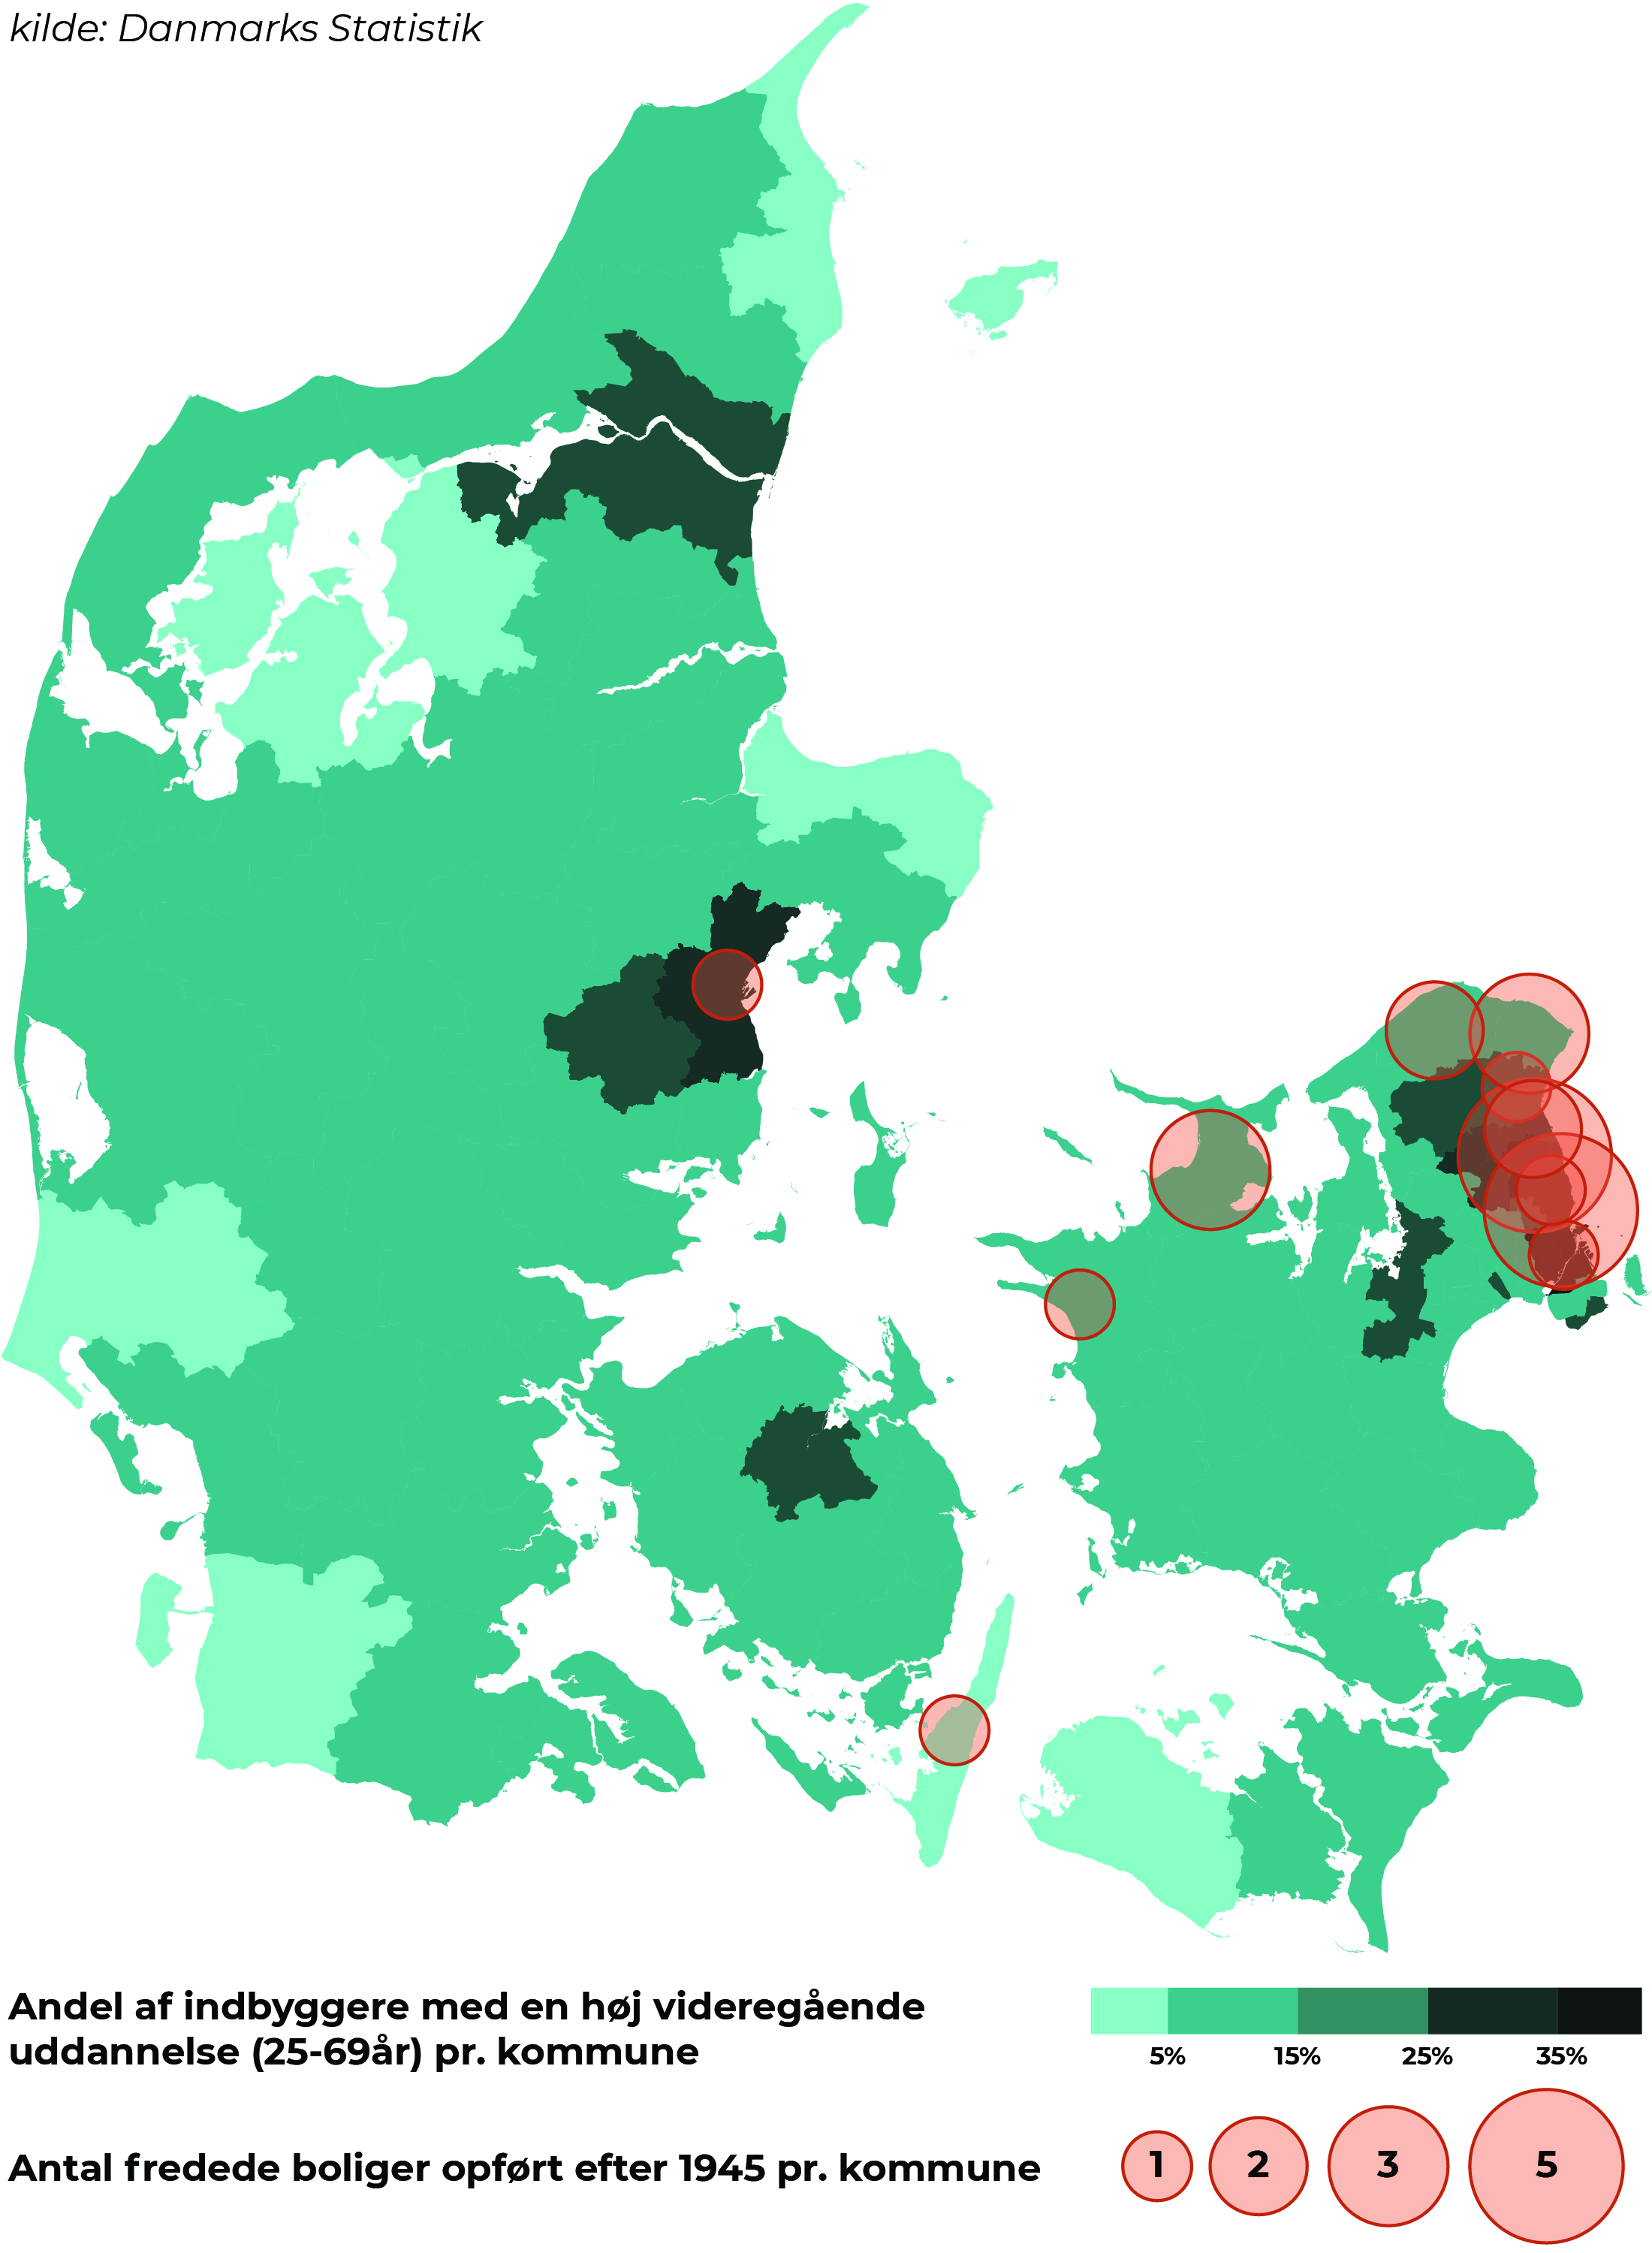 Map showing protected houses after 1945 made by Danmarks Statistik